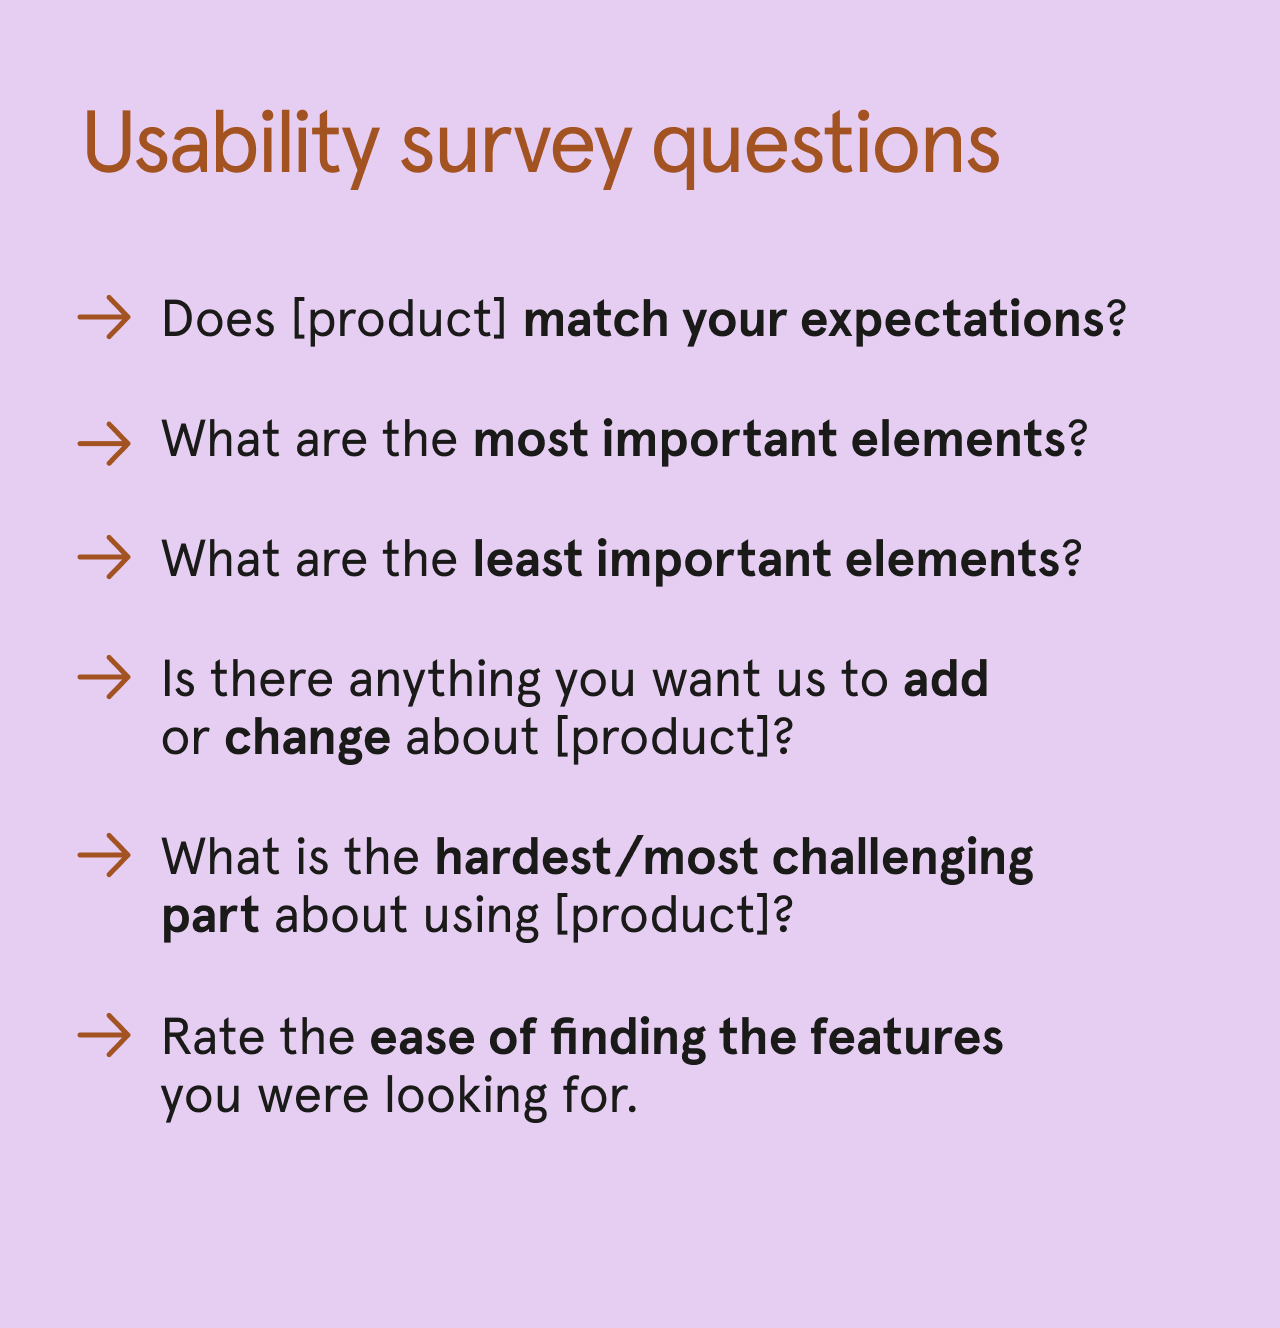 List of usability user experience survey questions.